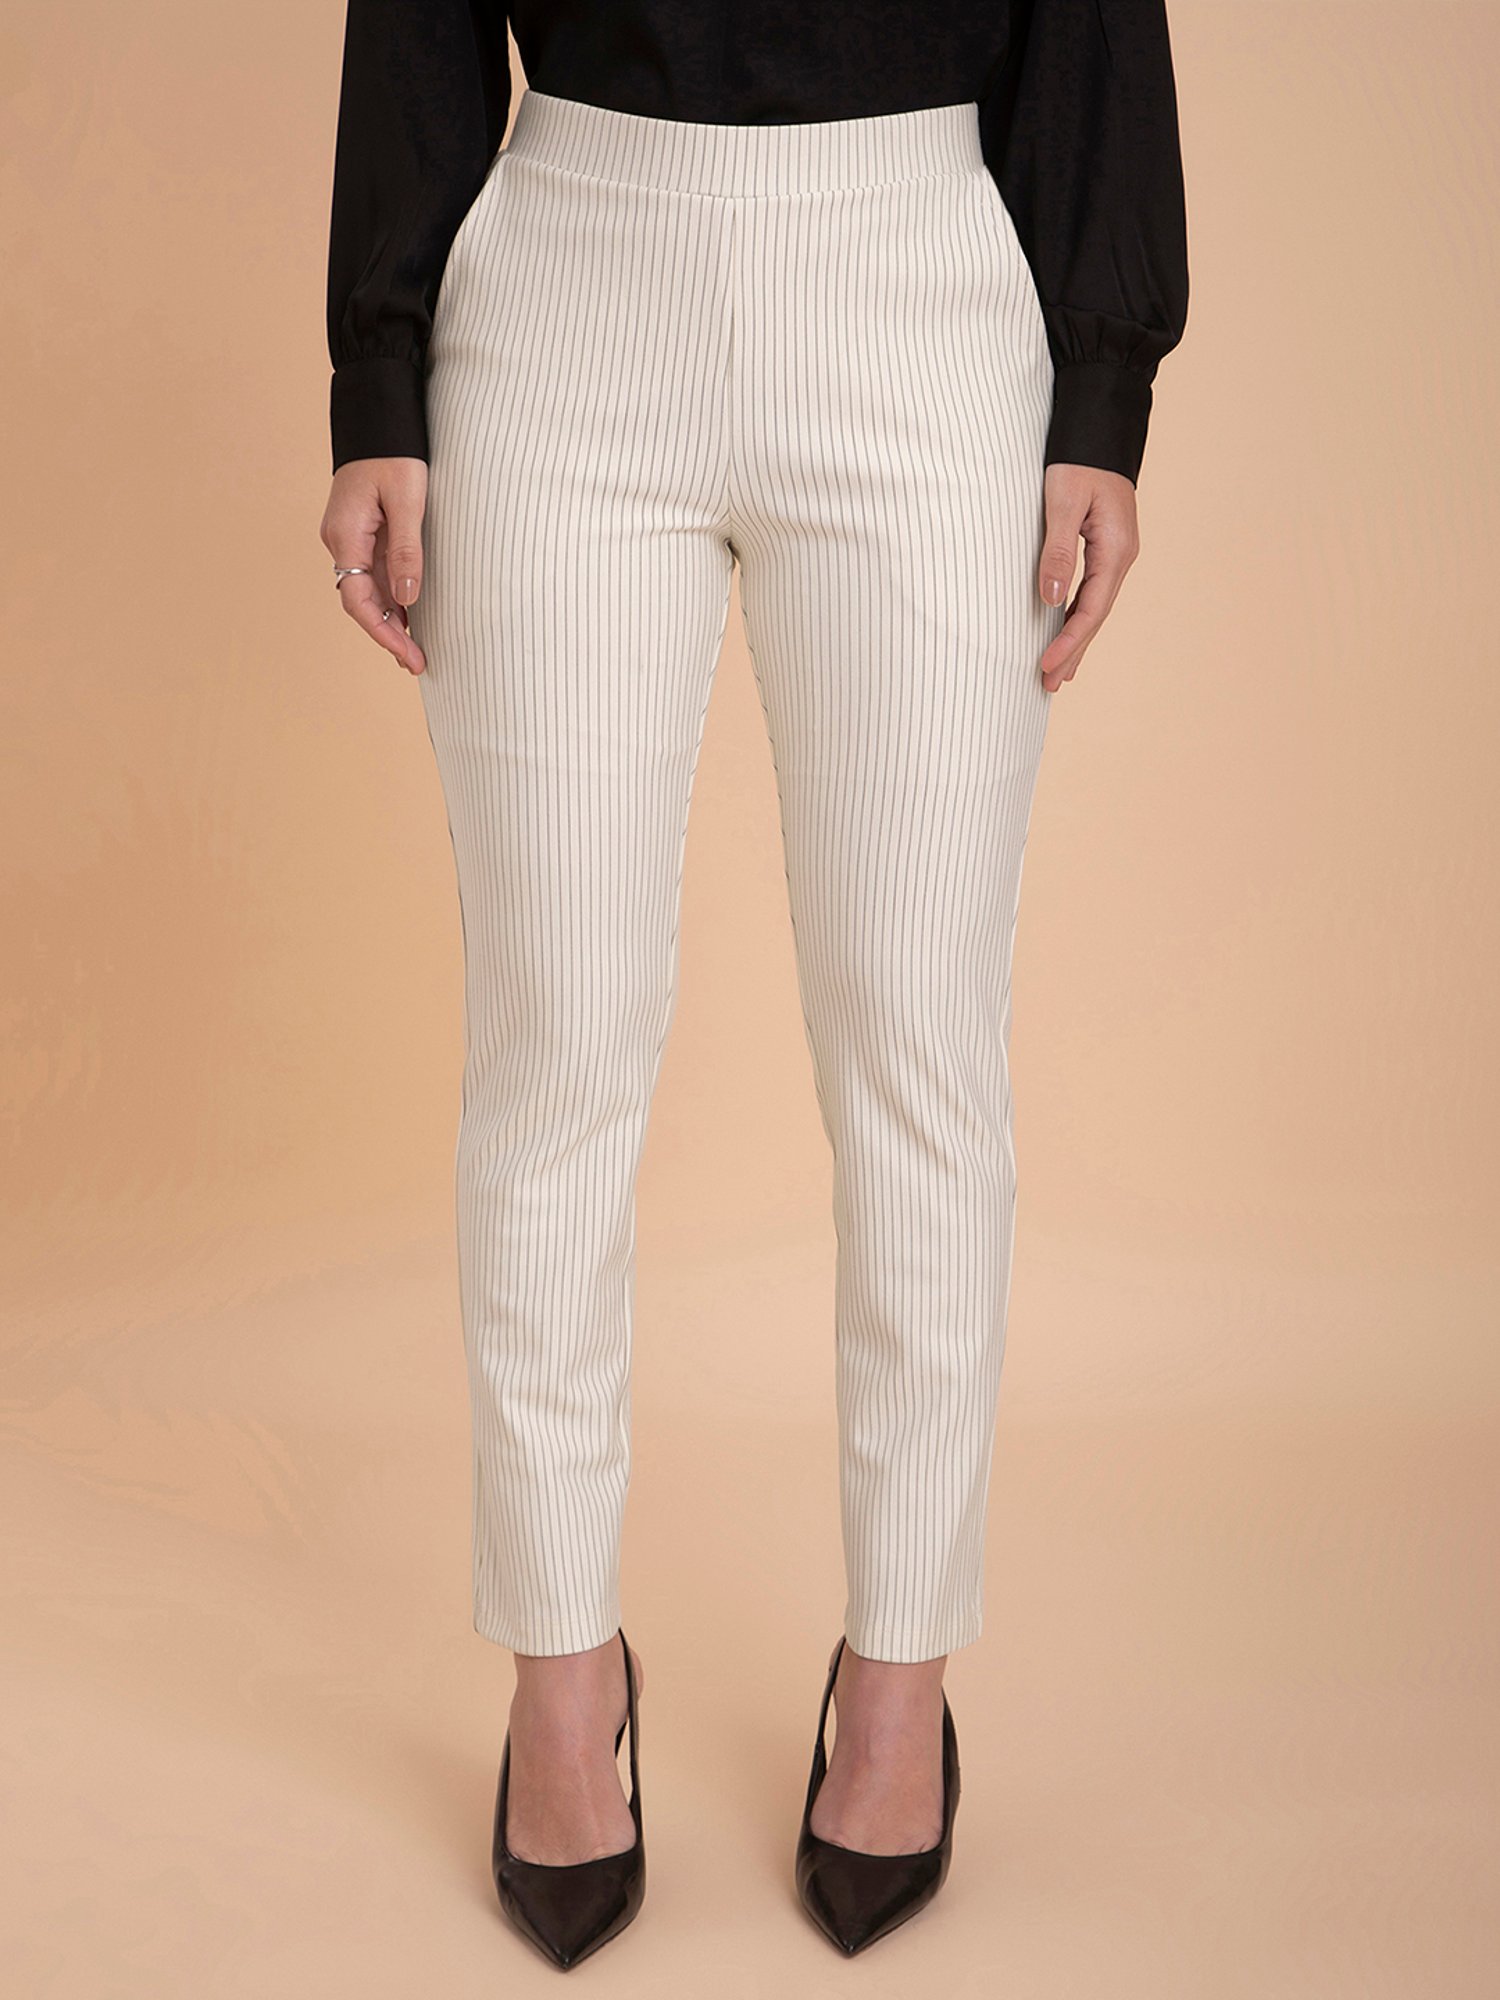 Buy Solemio Mid-Rise Flat-Front Pants at Redfynd